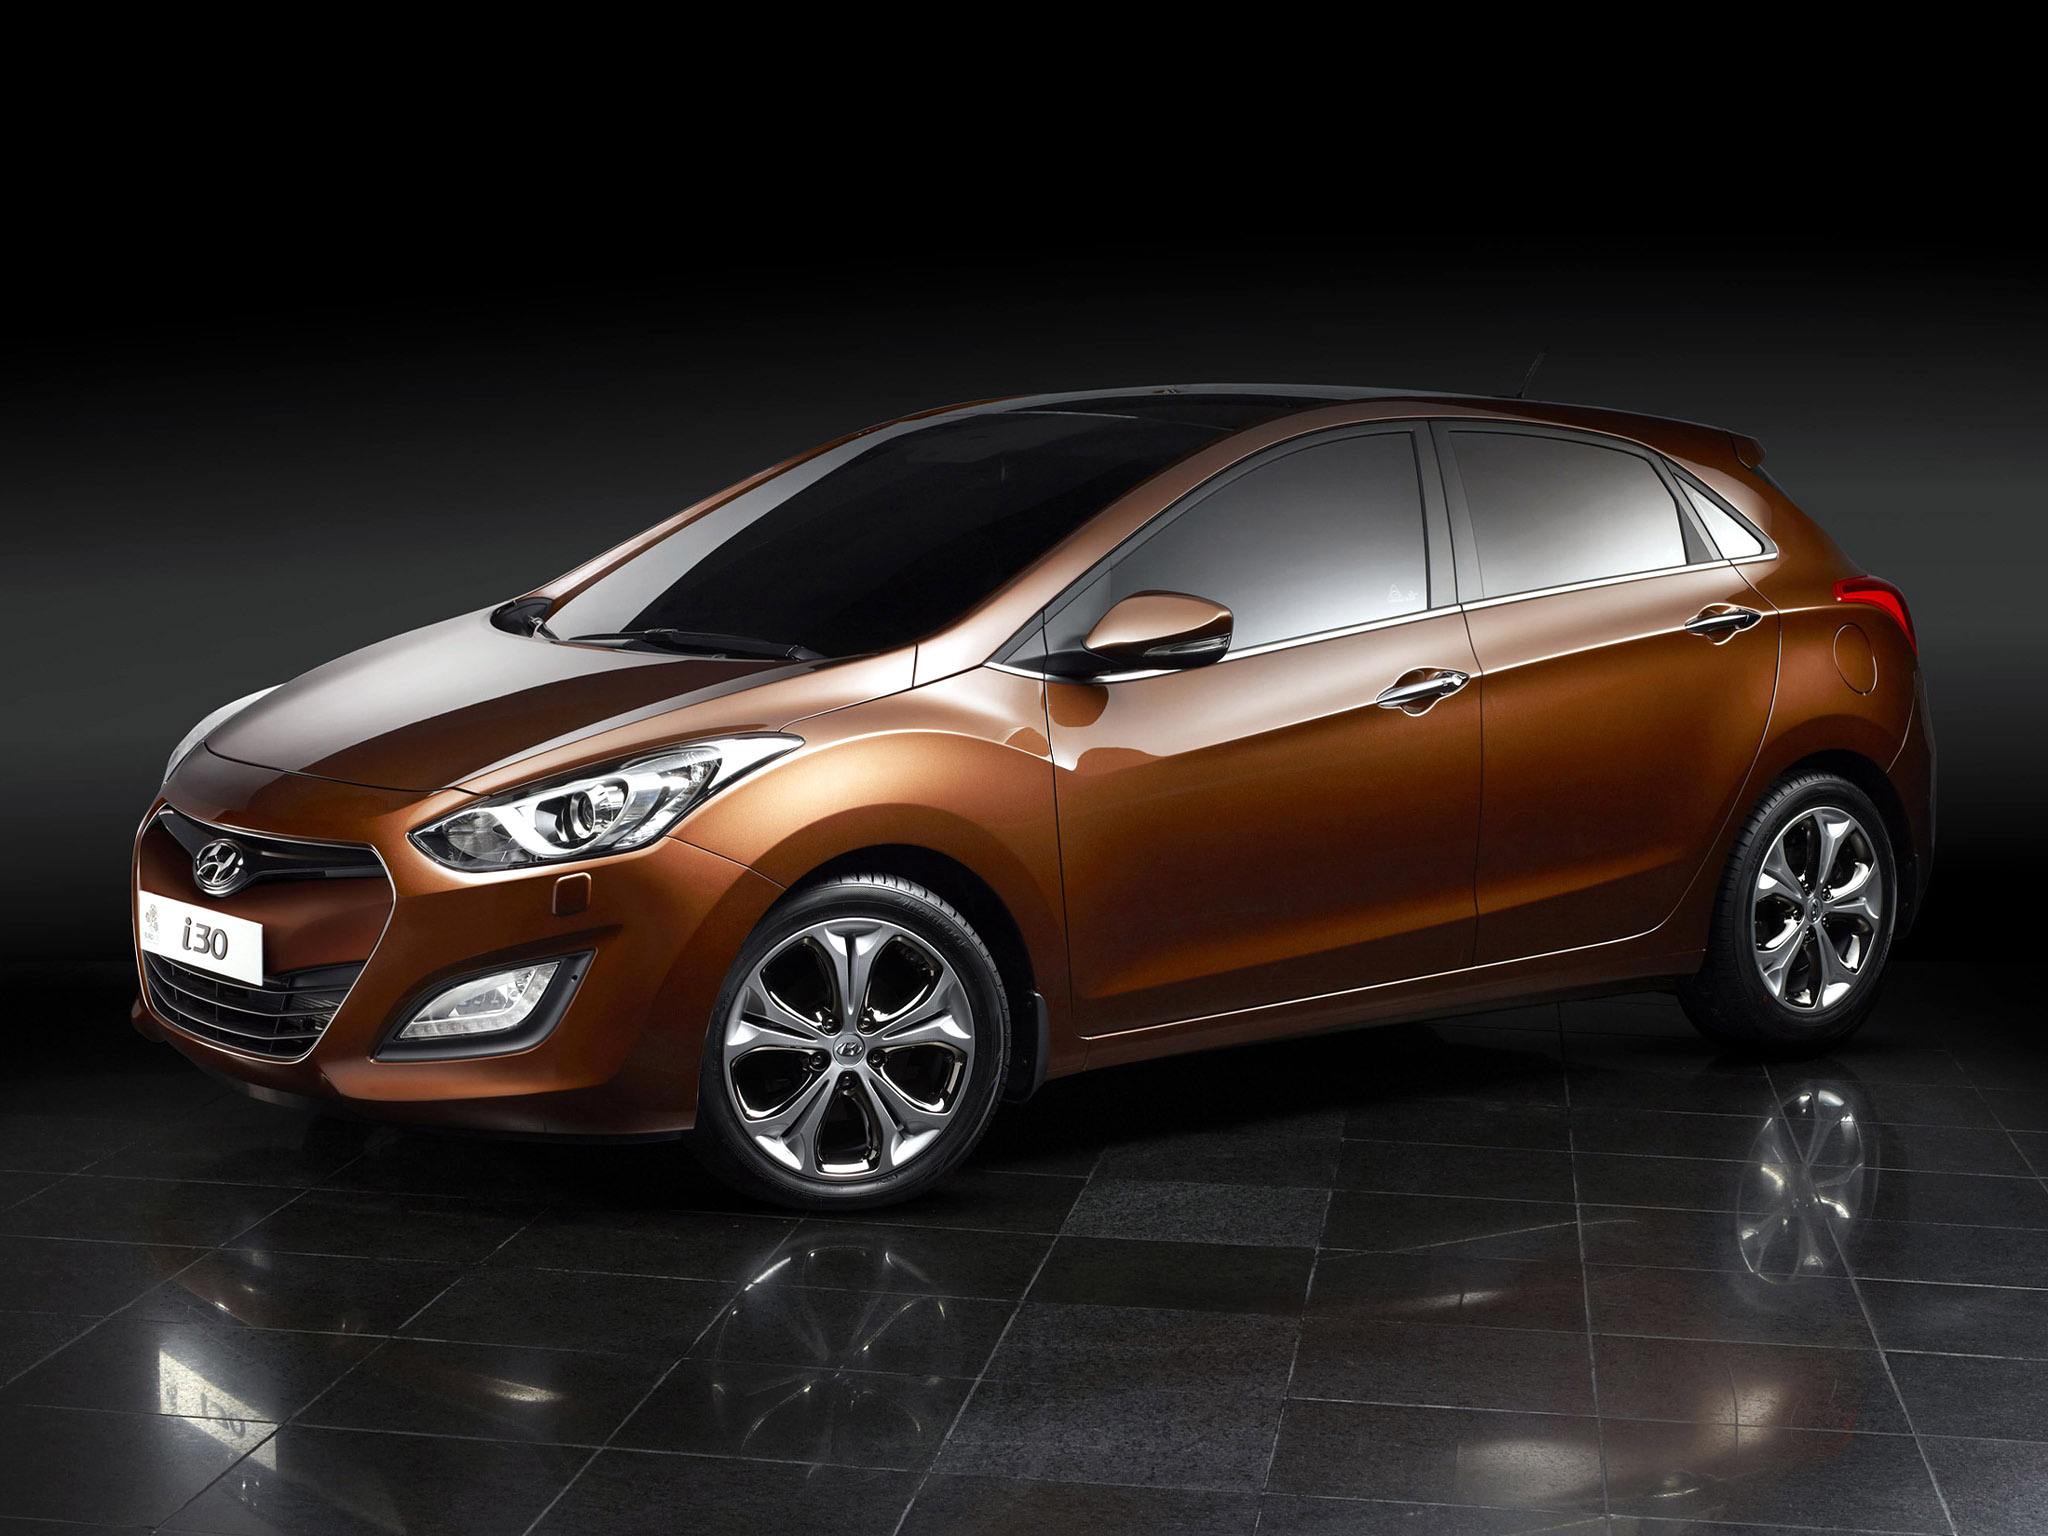 Car in pictures car photo gallery » Hyundai i30 2011